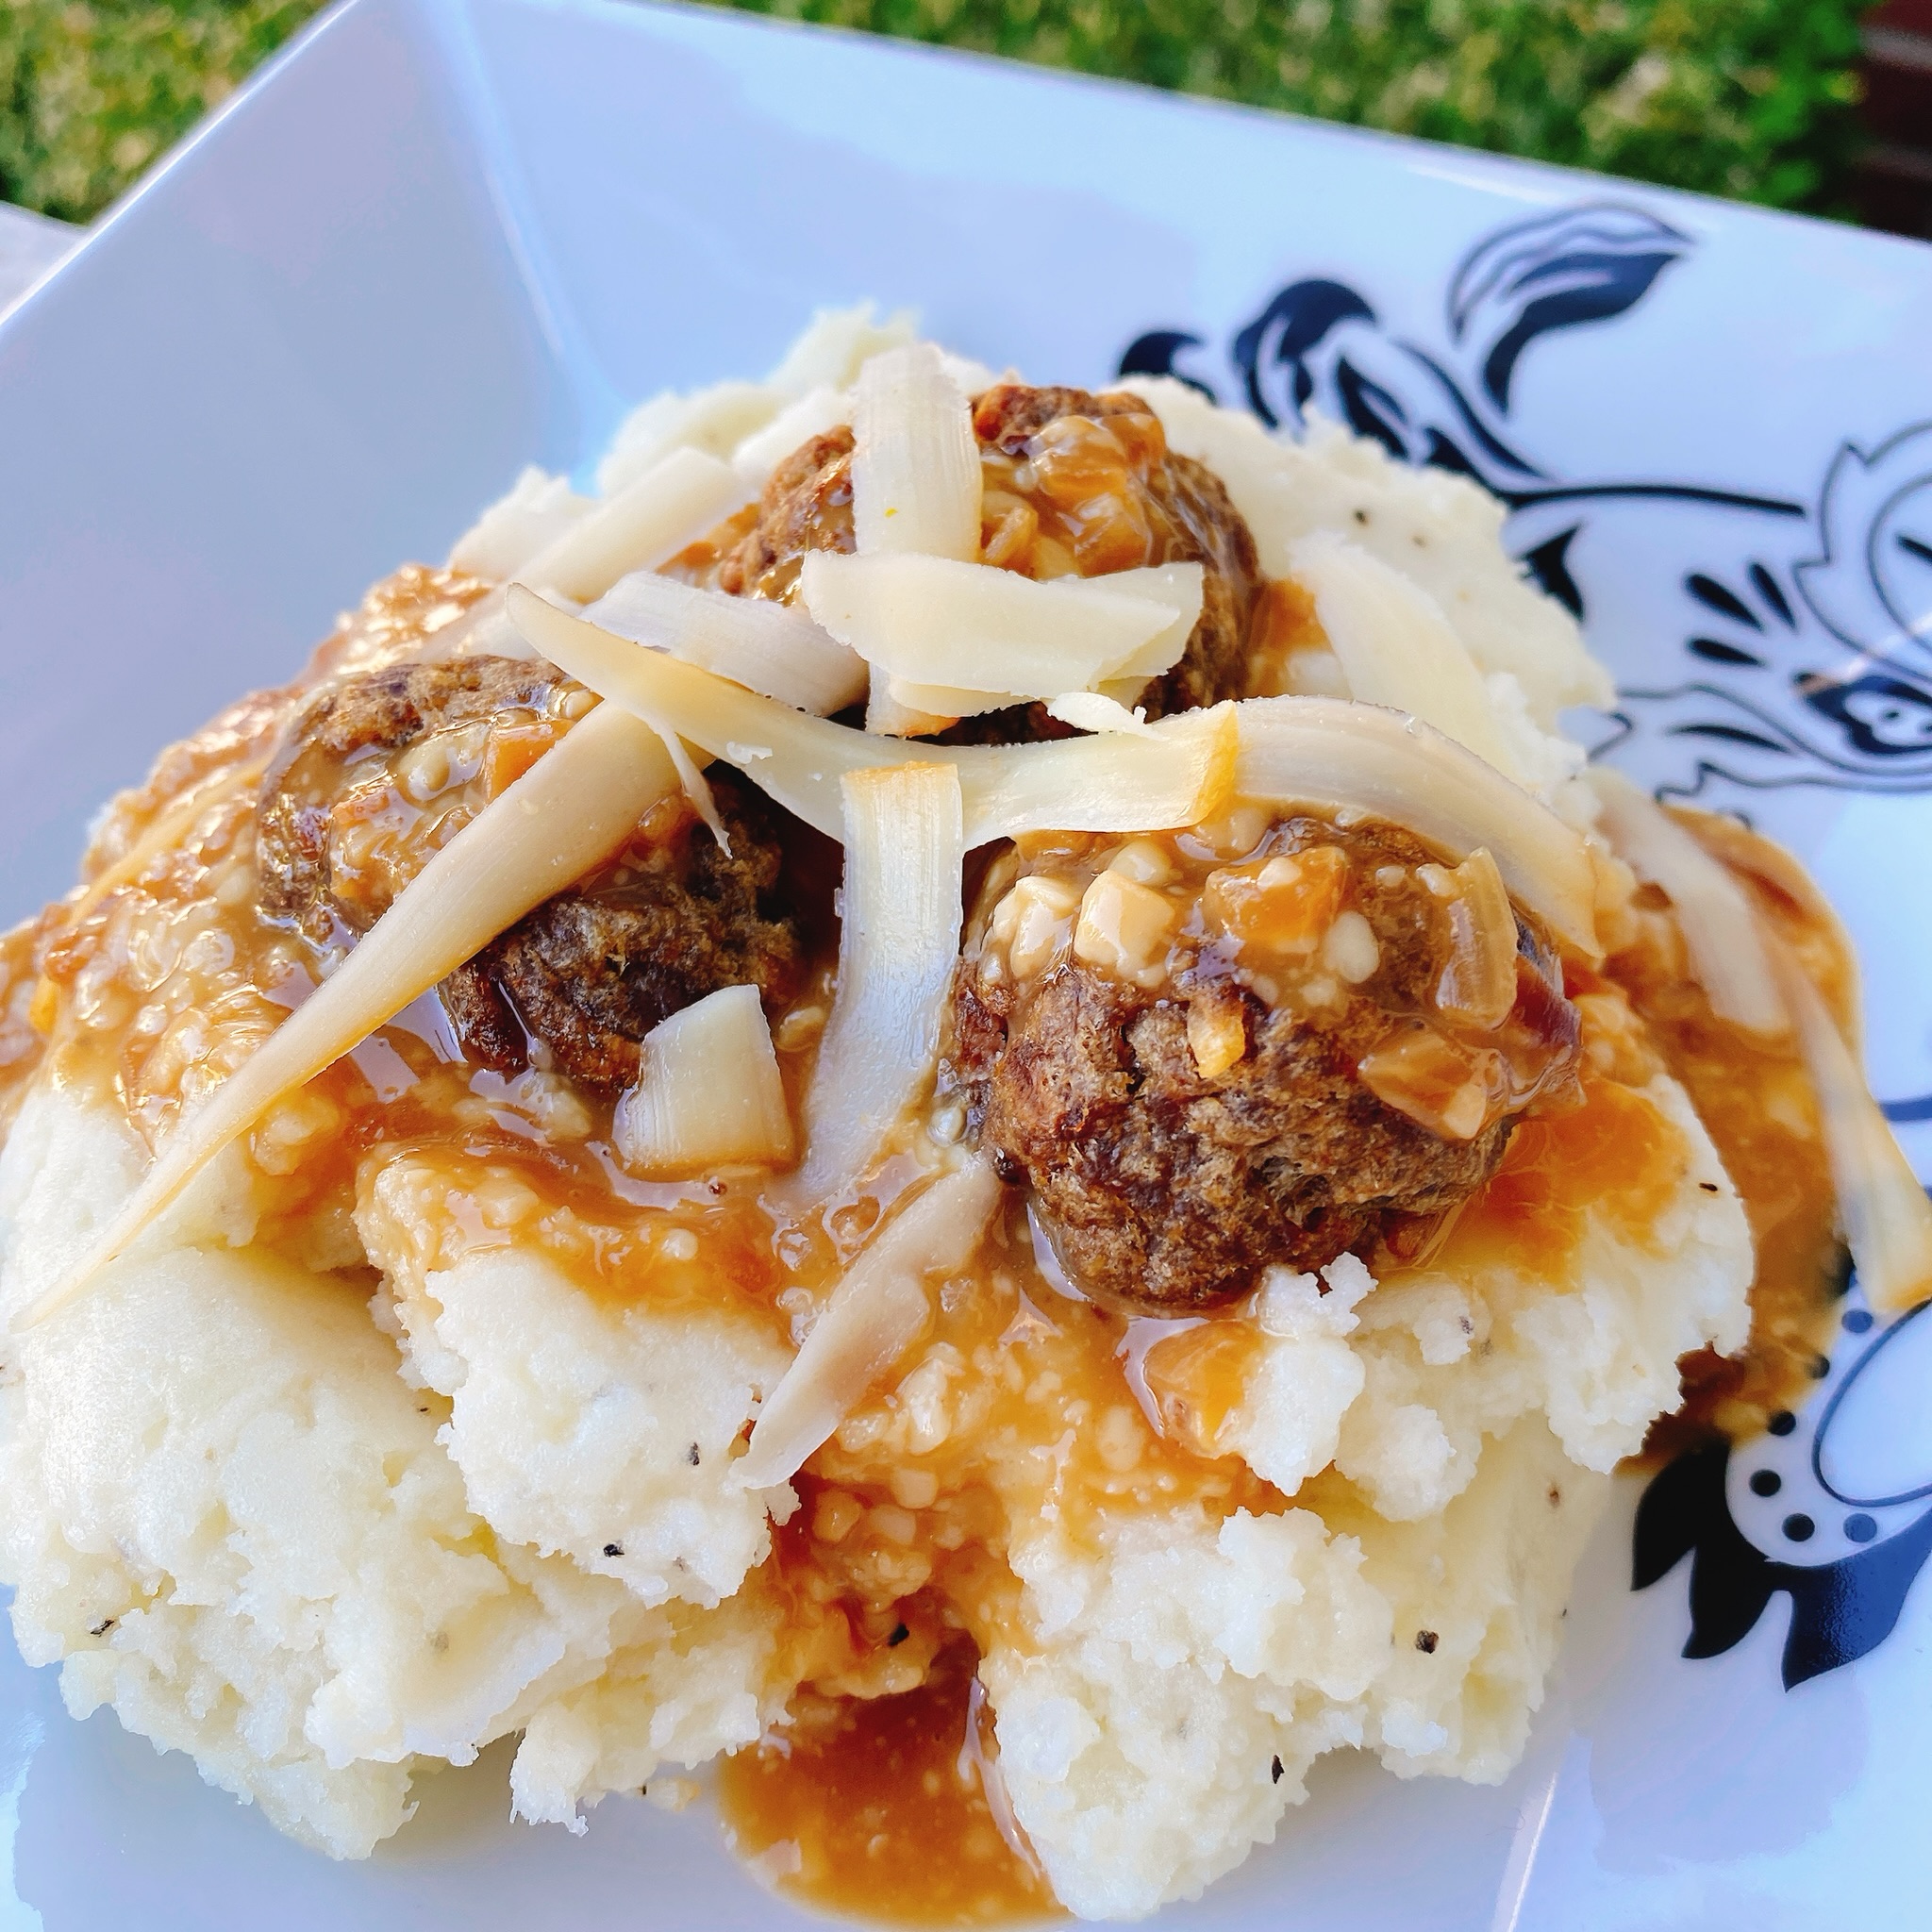 <p>These French onion-flavored meatballs are served with a savory Gruyere onion sauce and taste delicious on top of creamy mashed potatoes. "These are soooo delicious!" raves tntwo. "I didn't have gruyere so I used provolone. Served them on hoagies rolls topped with a bit of provolone."</p>
                          